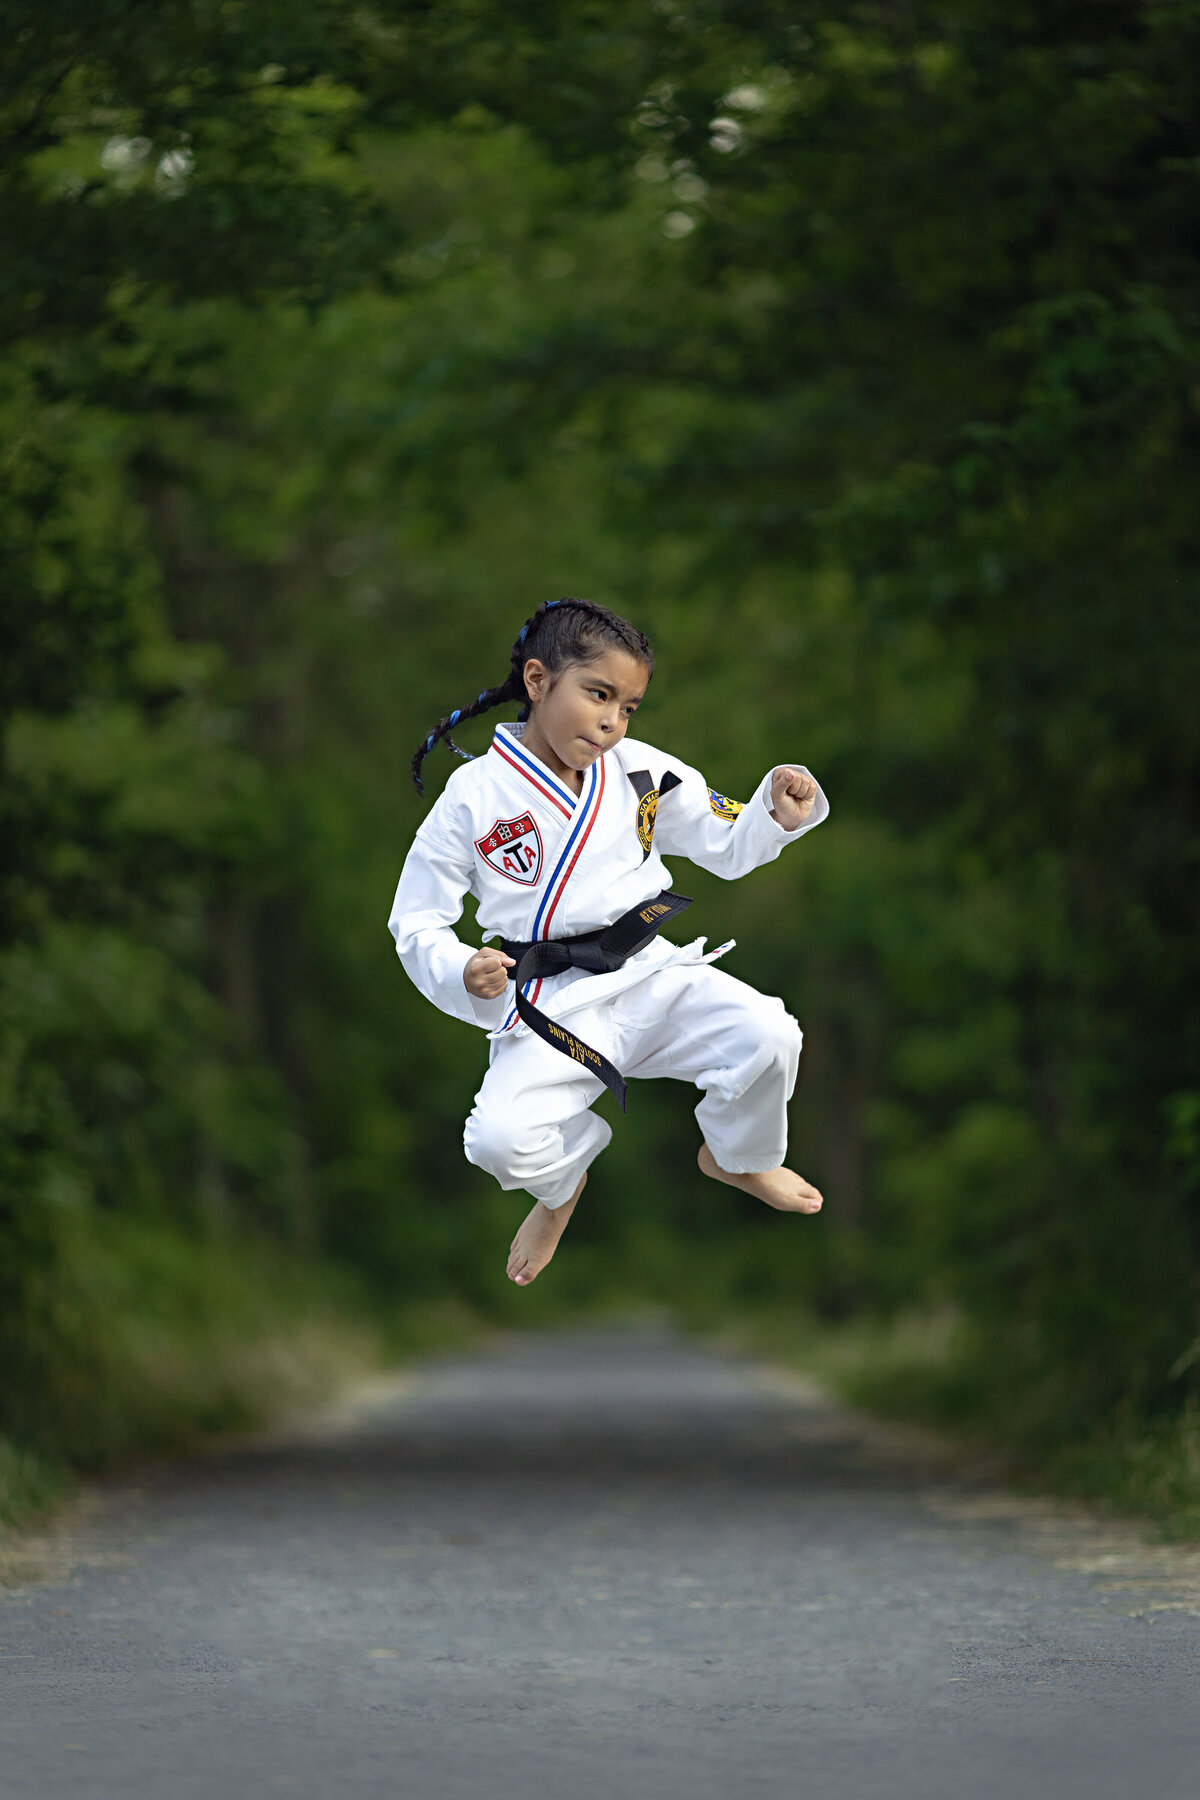 A young girl in a karate uniform performs a jump kick in a park sidewalk